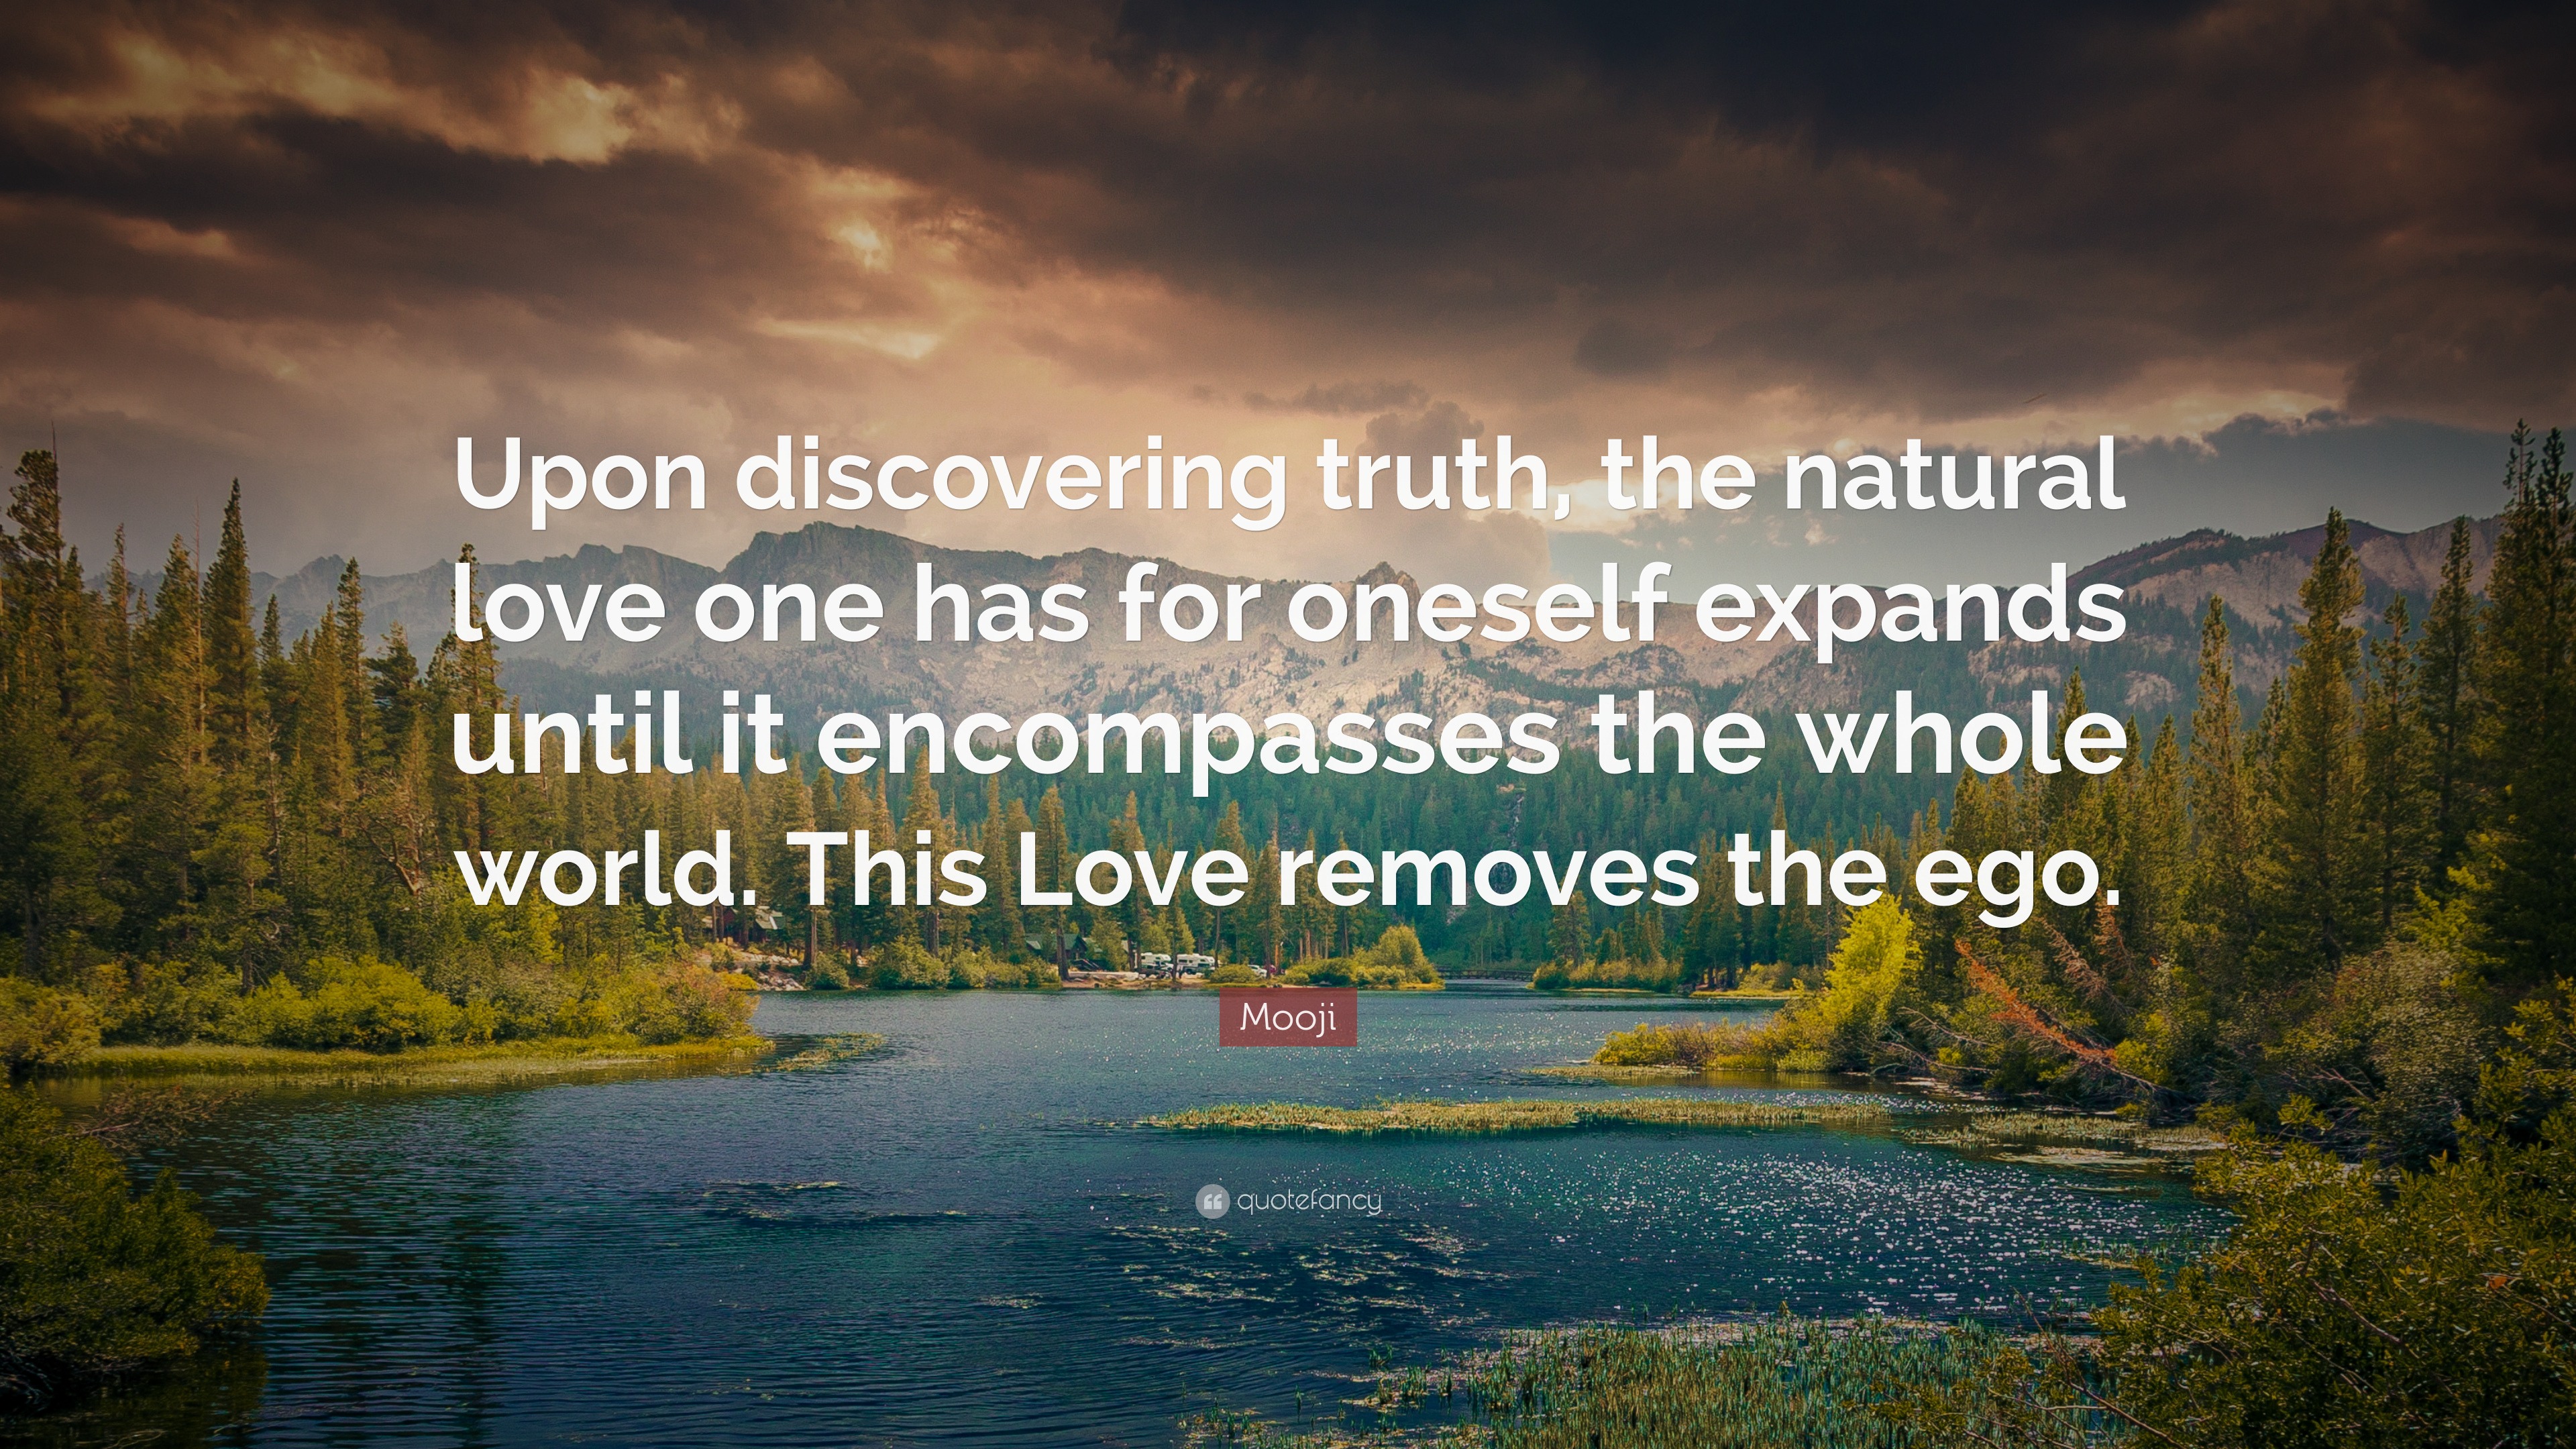 Mooji Quote: “Upon discovering truth, the natural love one has for ...